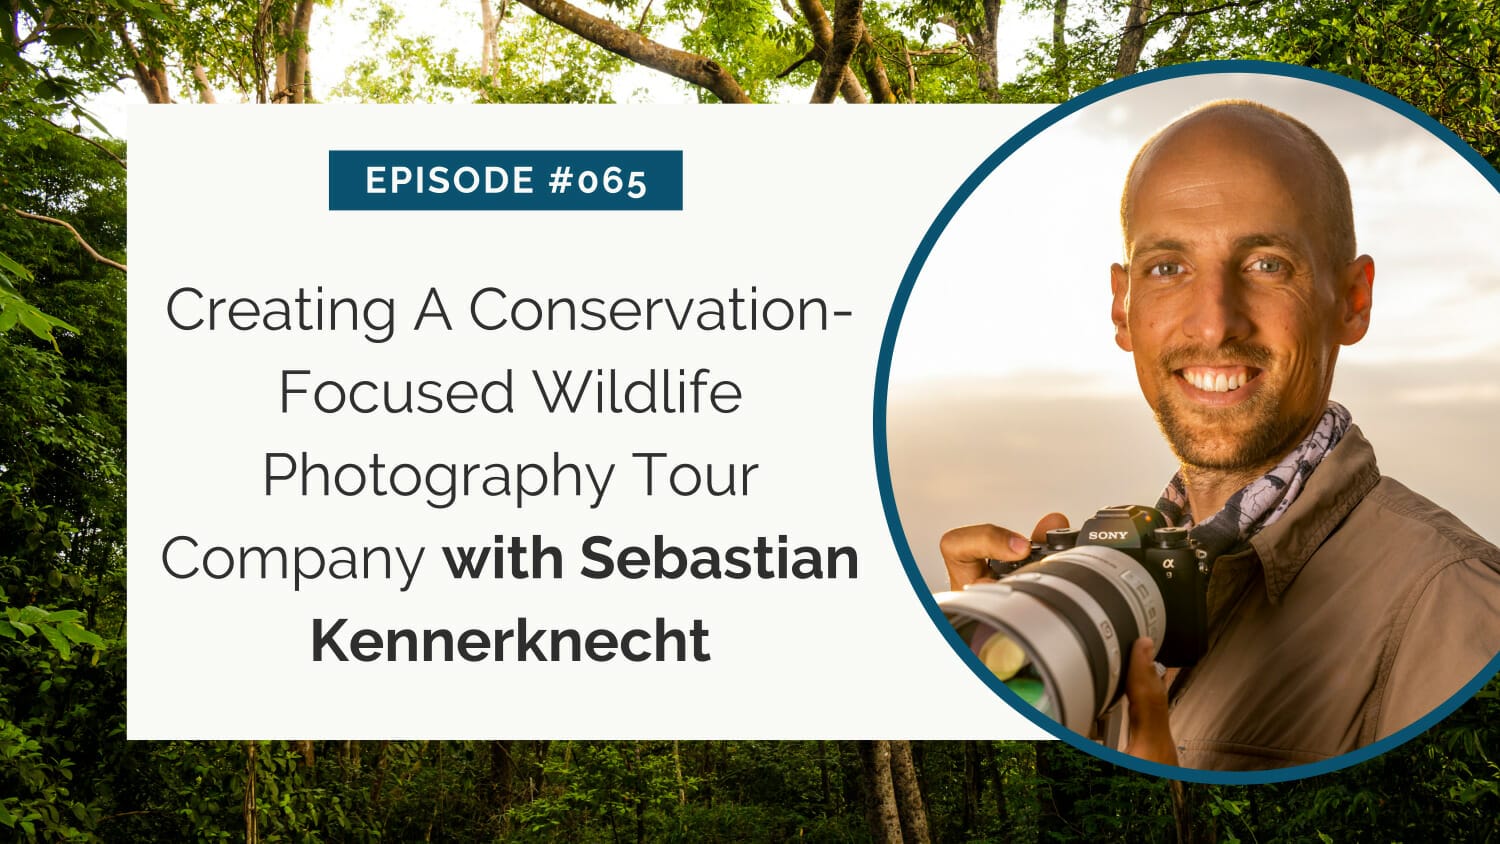 Promotional image for episode #065 featuring sebastian kennerknecht discussing the creation of a conservation-focused wildlife photography tour company.